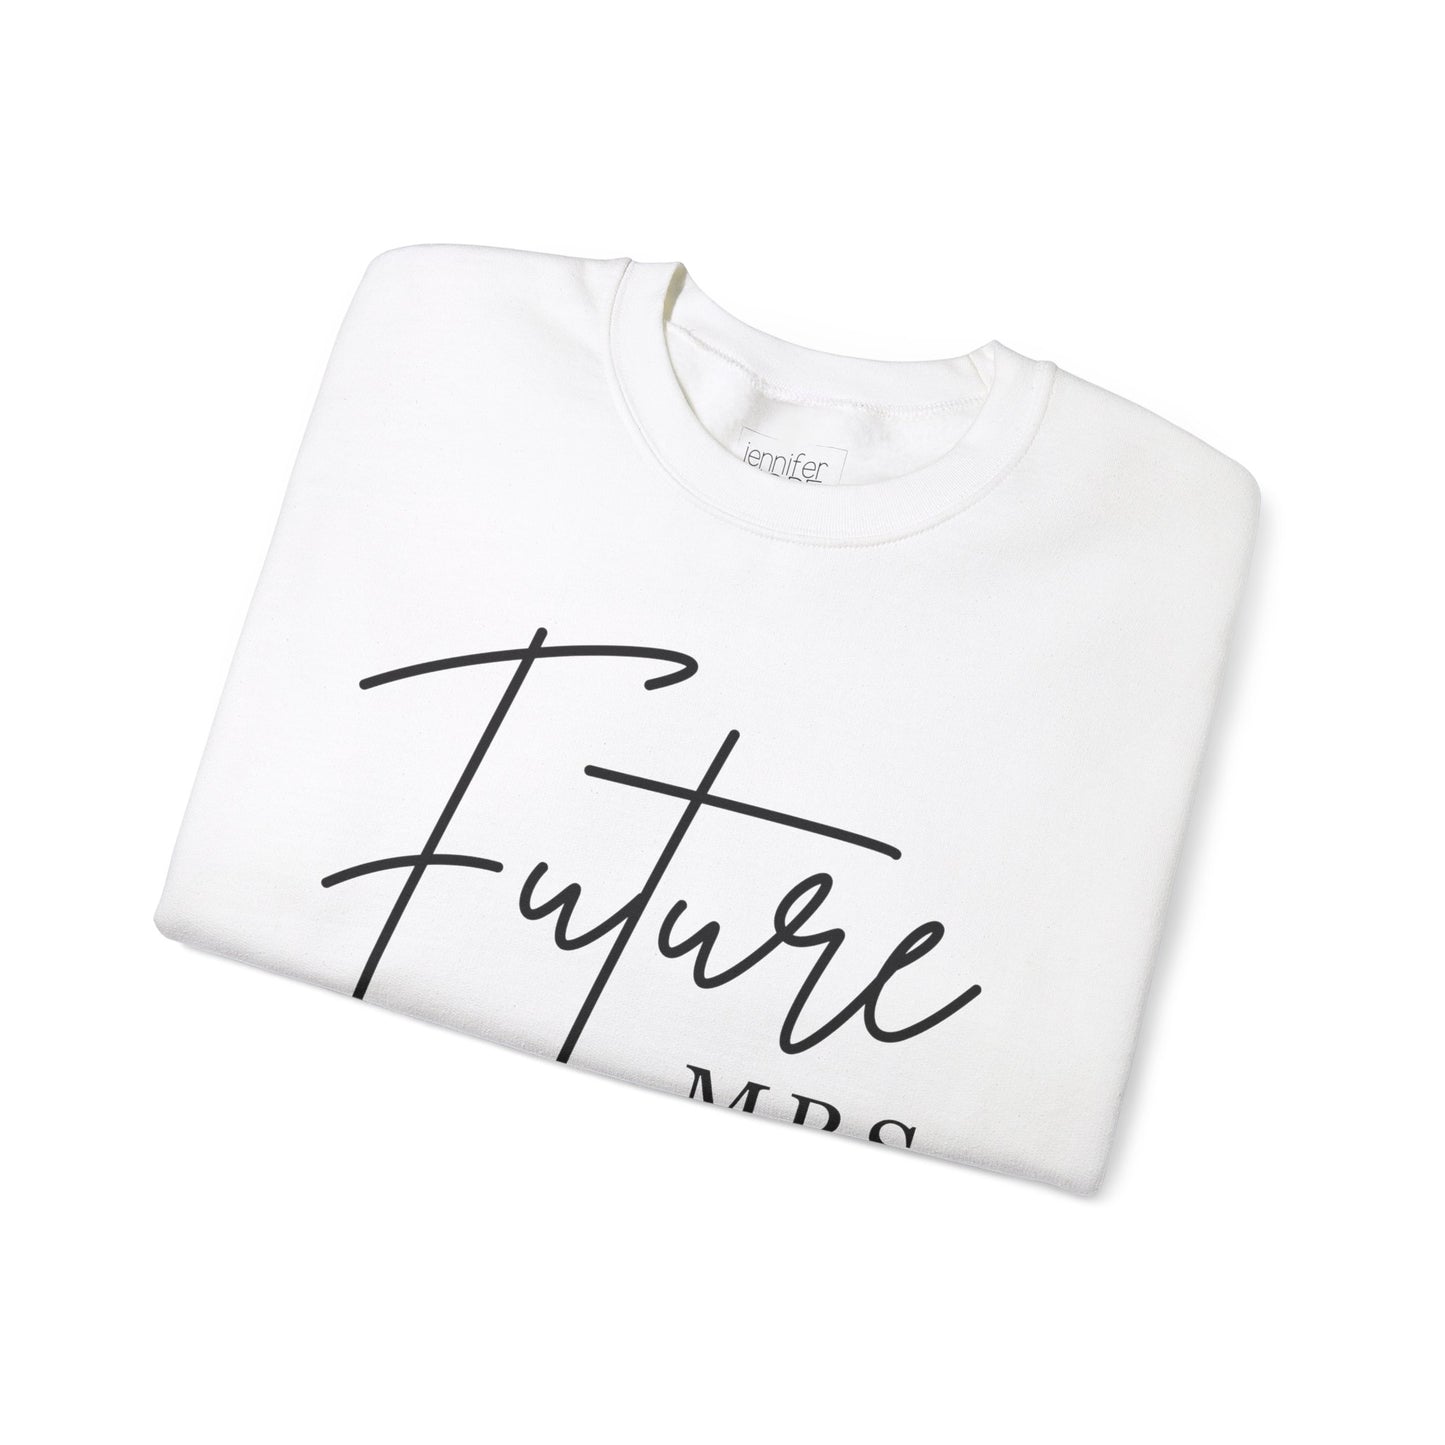 Future Mrs. Crewneck Customizable Bridal Sweatshirt Personalize it with your new Last name on the back.